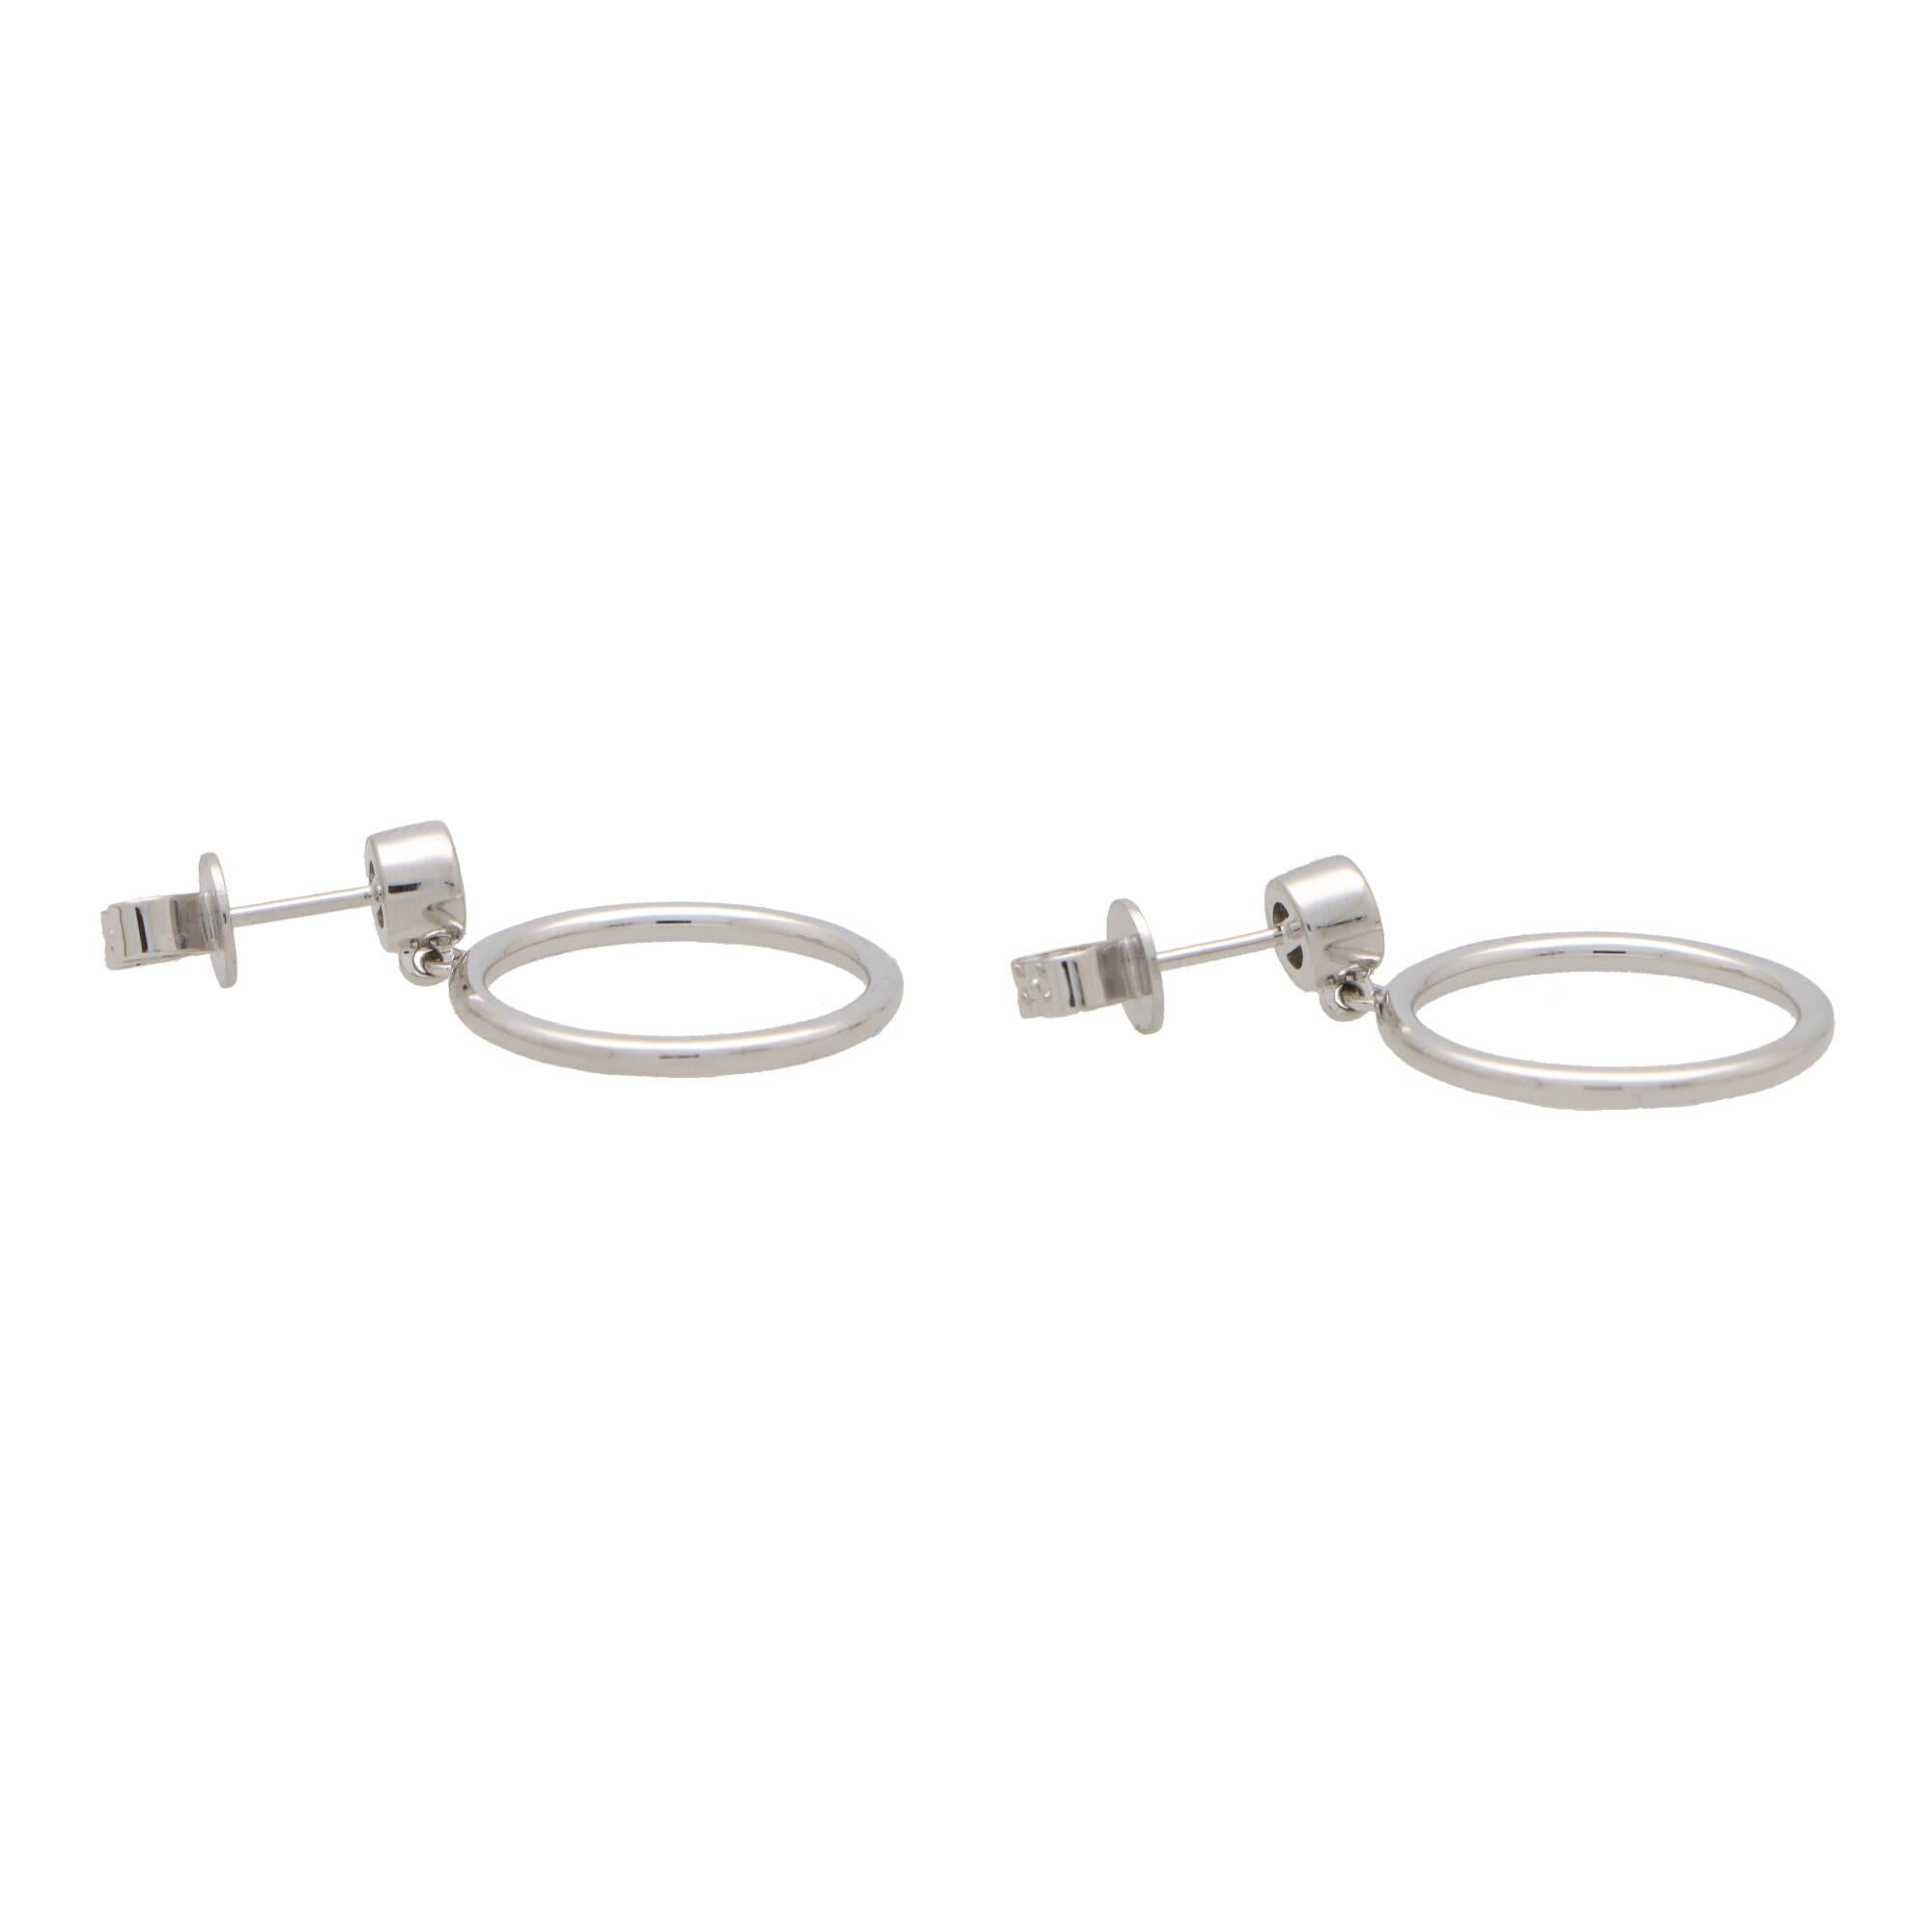 A stylish pair of contemporary diamond circle drop earrings set in 14k white gold.

Each earring features a rub over set round brilliant cut diamond which is secured with a post and butterfly fitting. Hanging freely from this stud is a solid